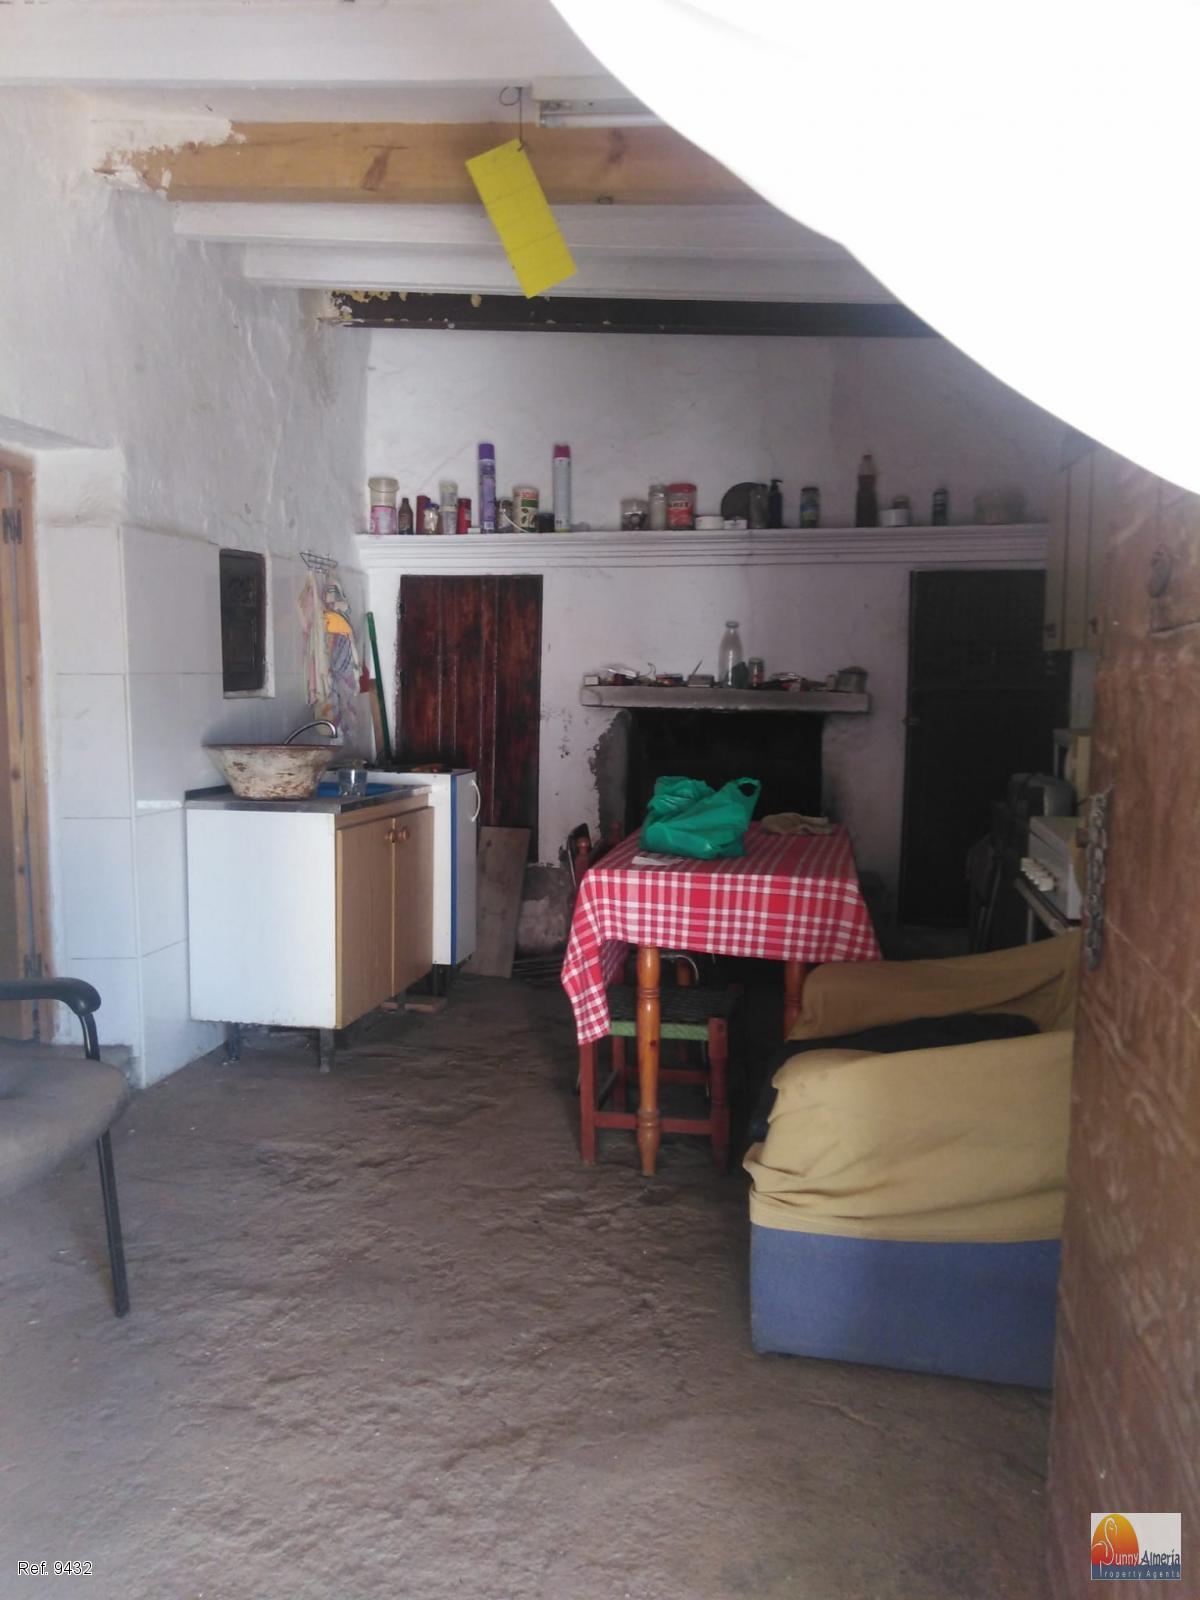 Country Properties for sale in Tabernas, 75.000 €